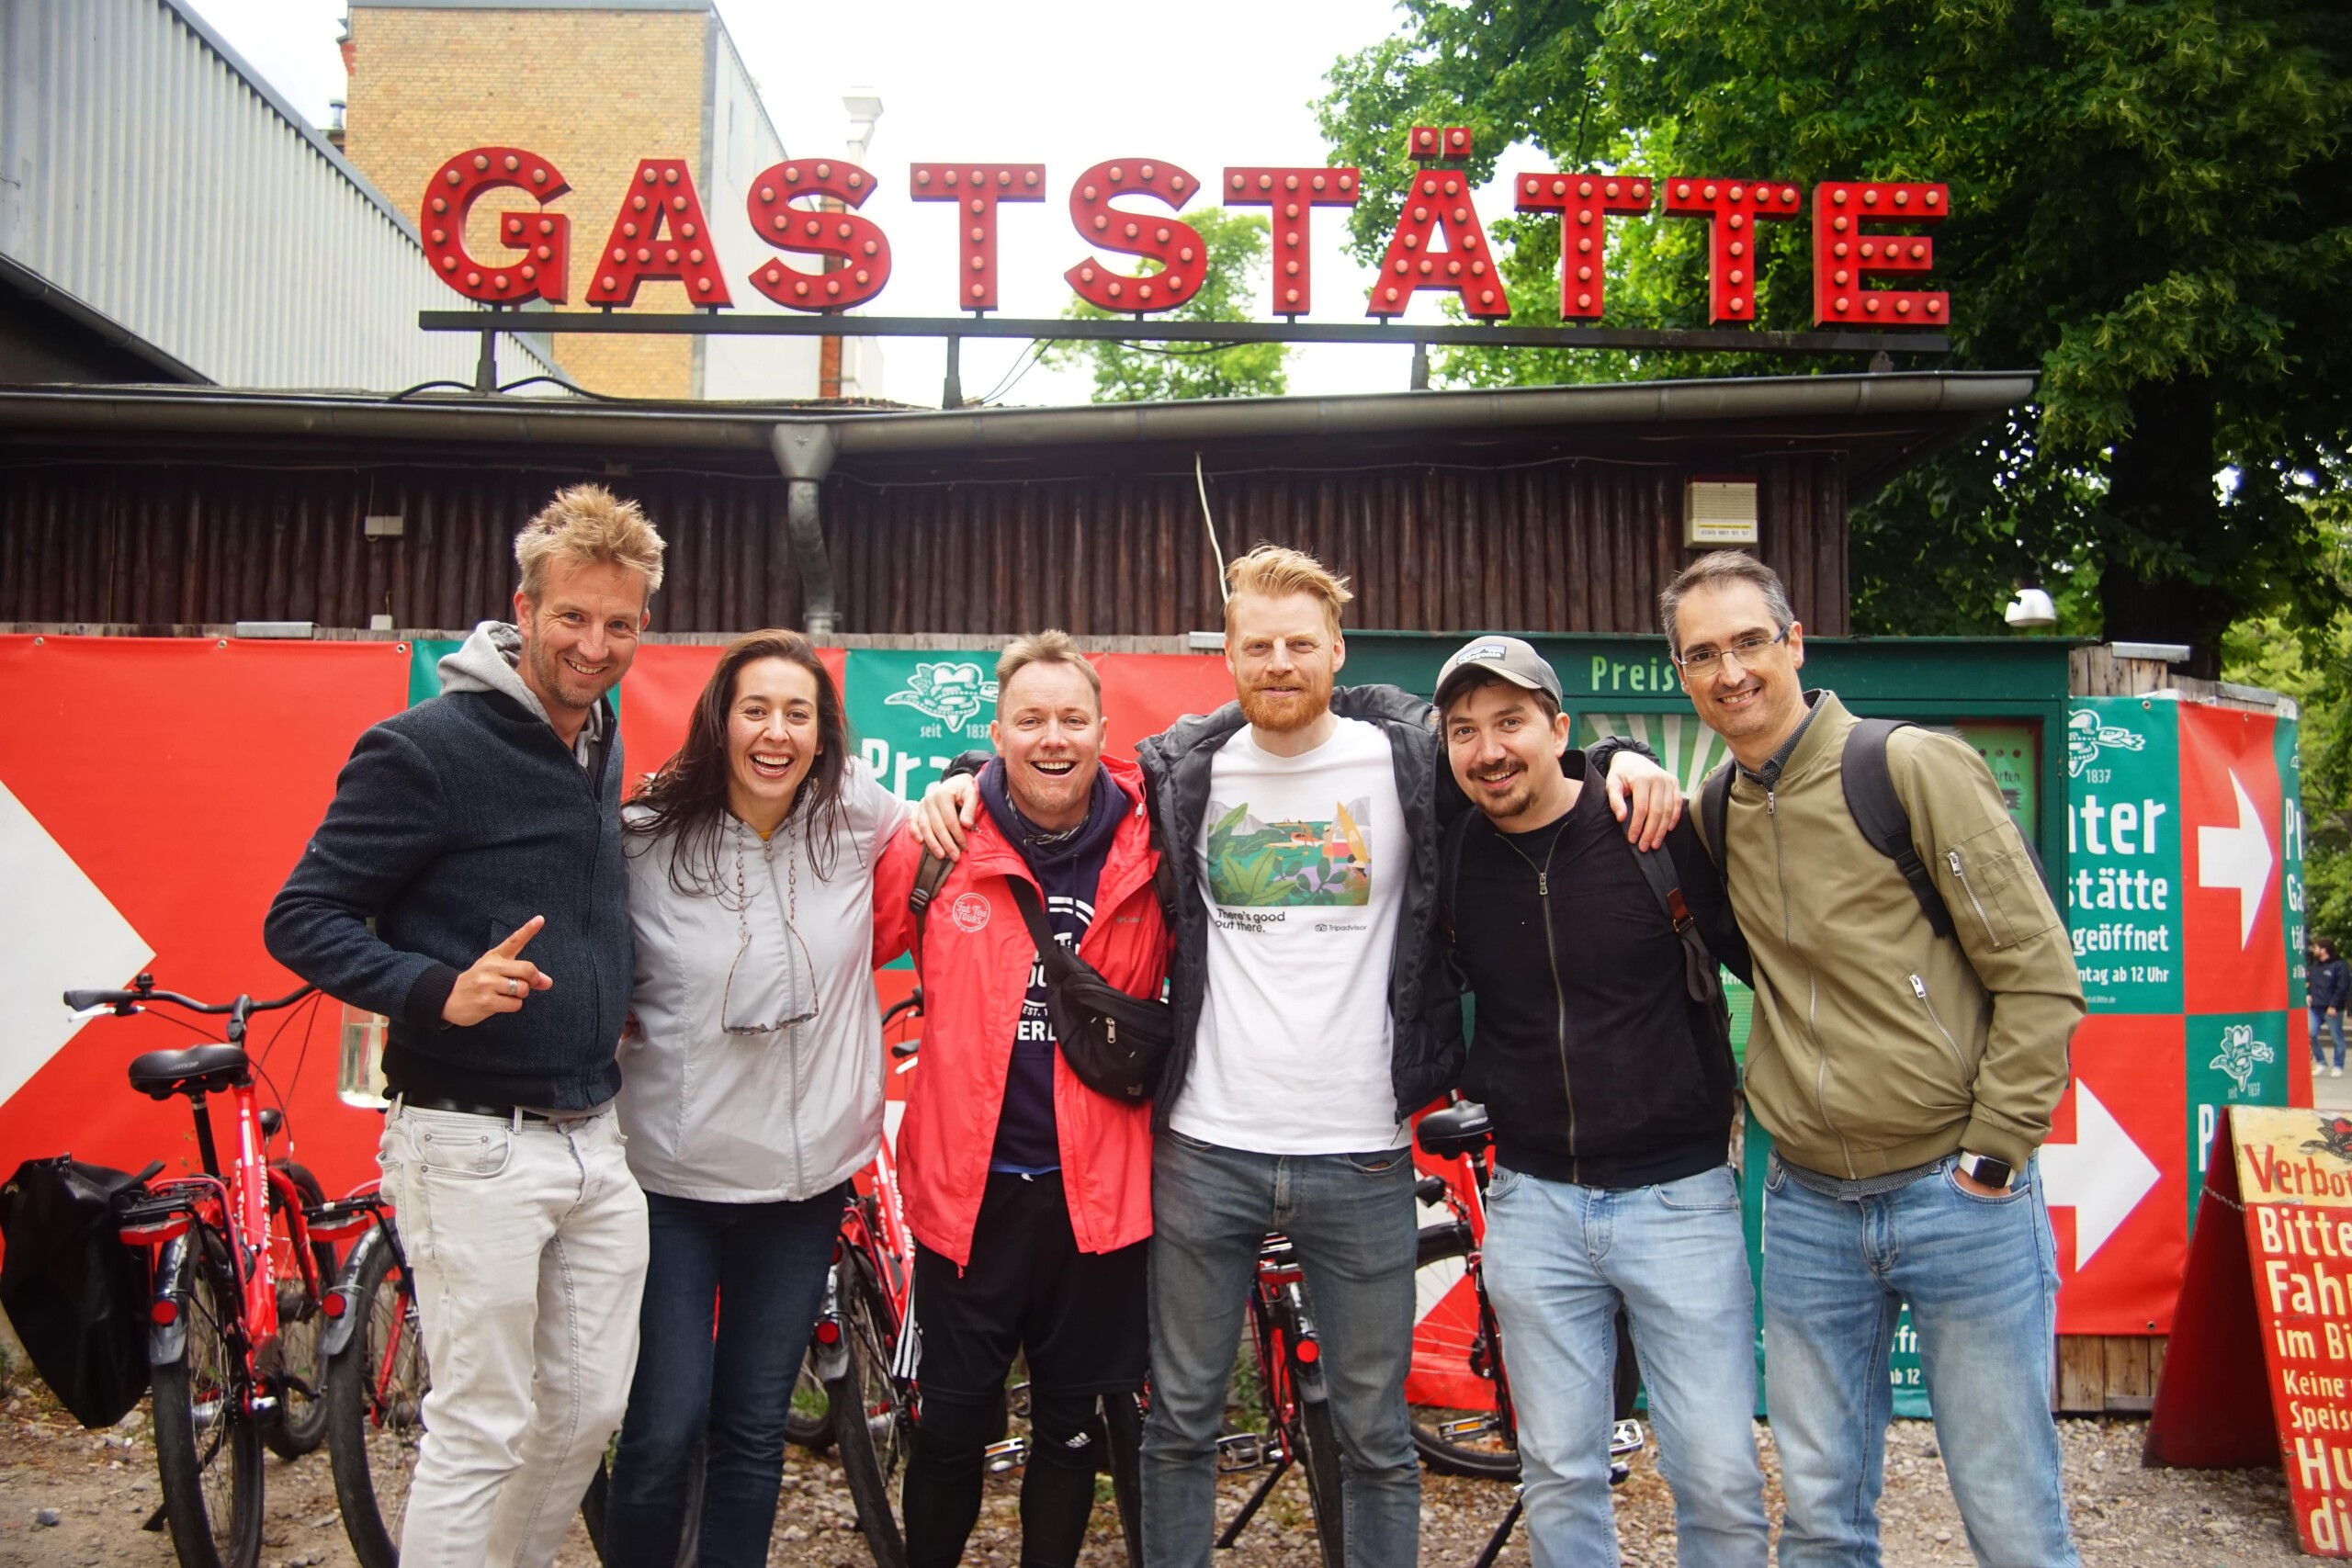 A group in front of the Prater Beer Garden in Berlin, Germany